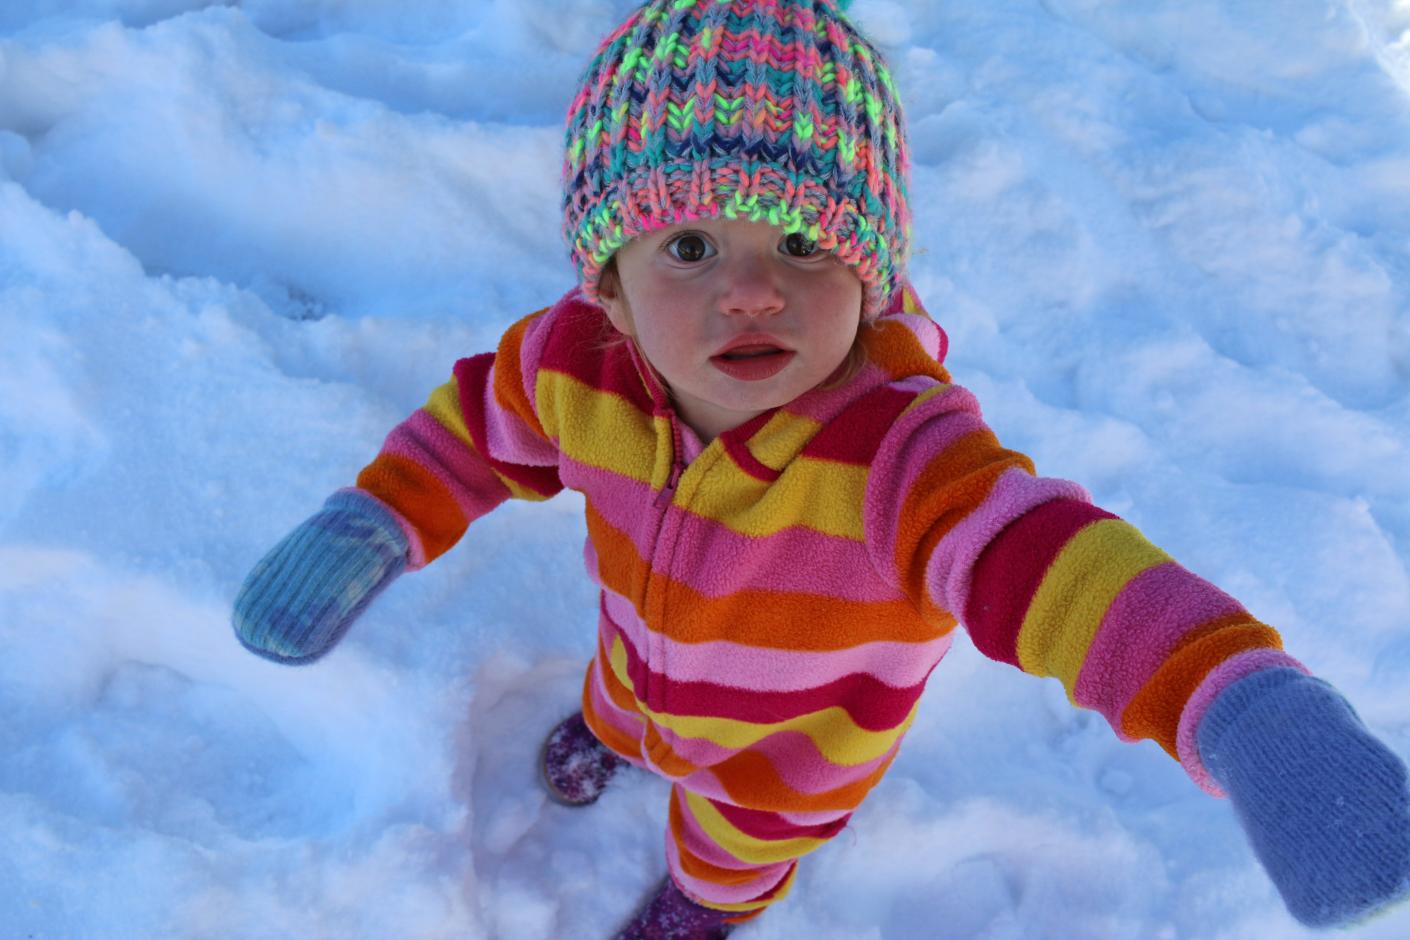 Toddler in Snow